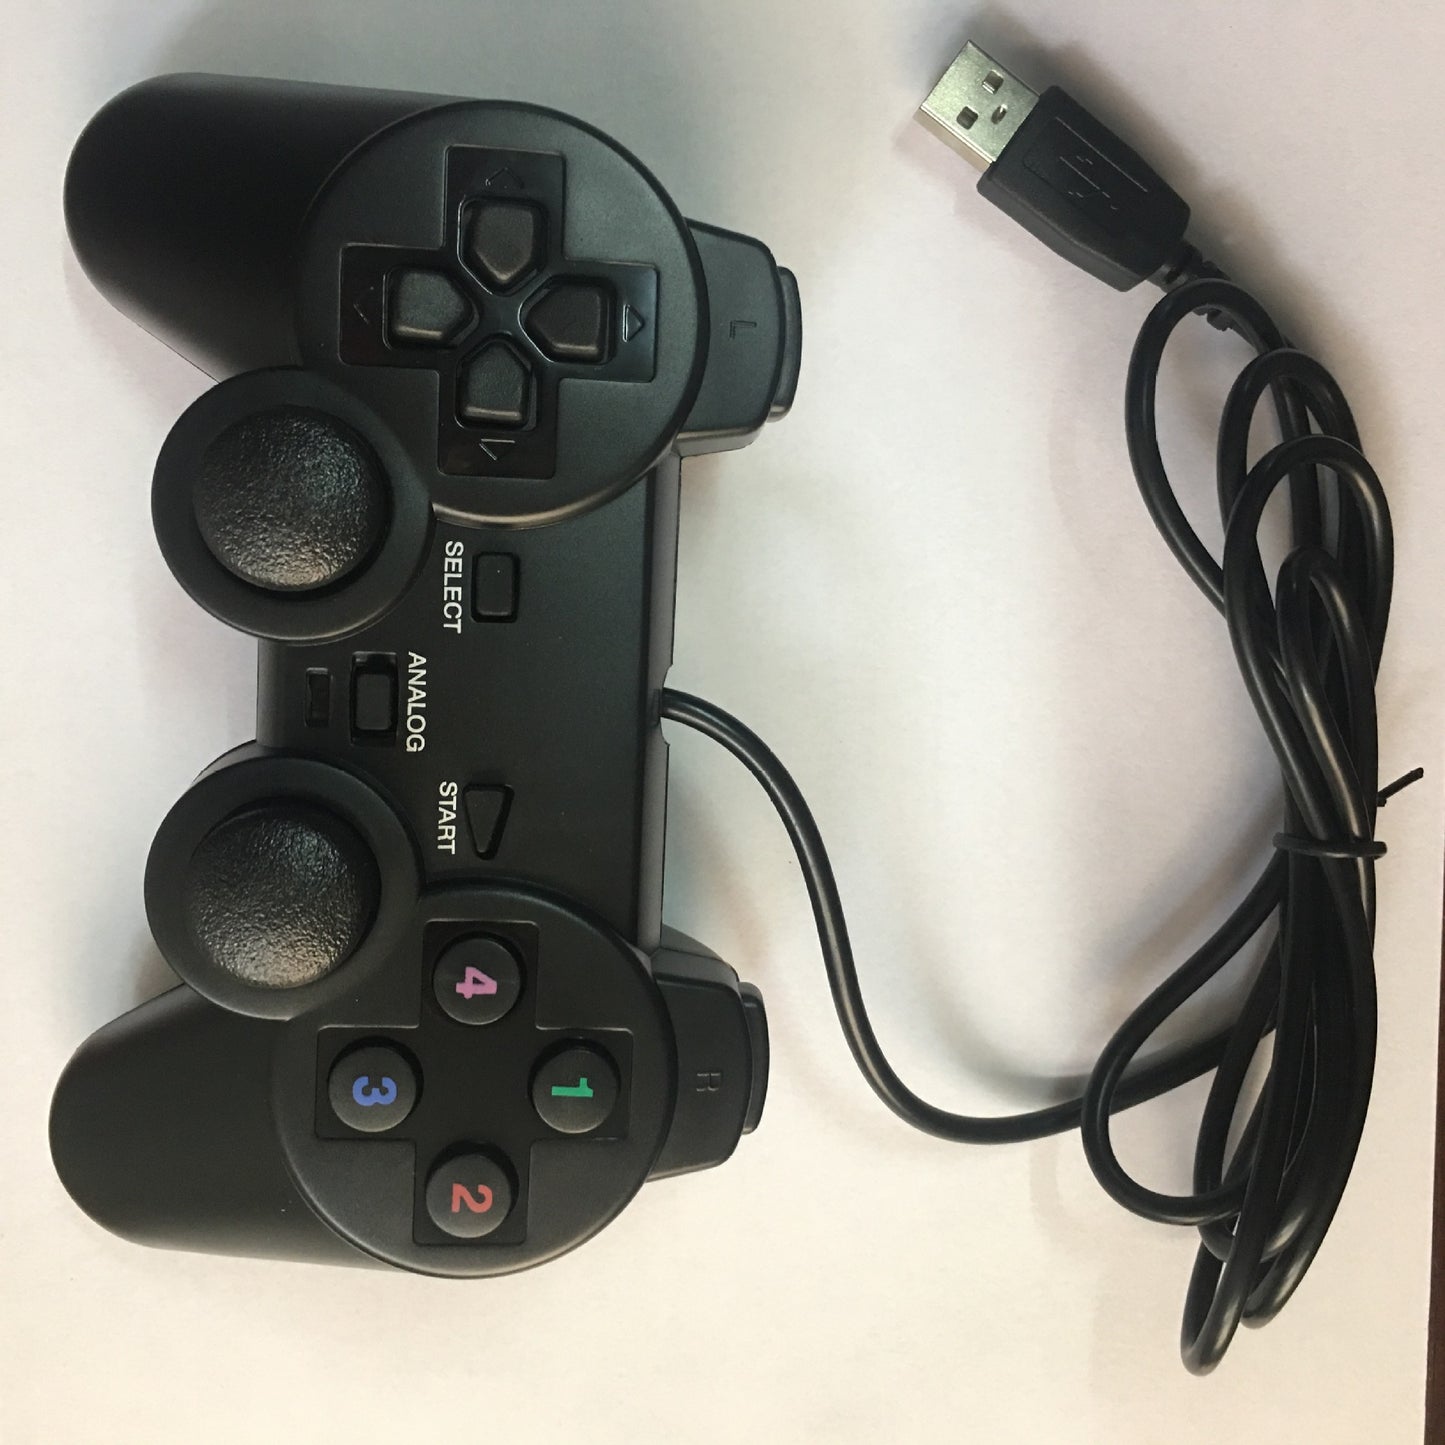 USB gamepad PS2 wired controller